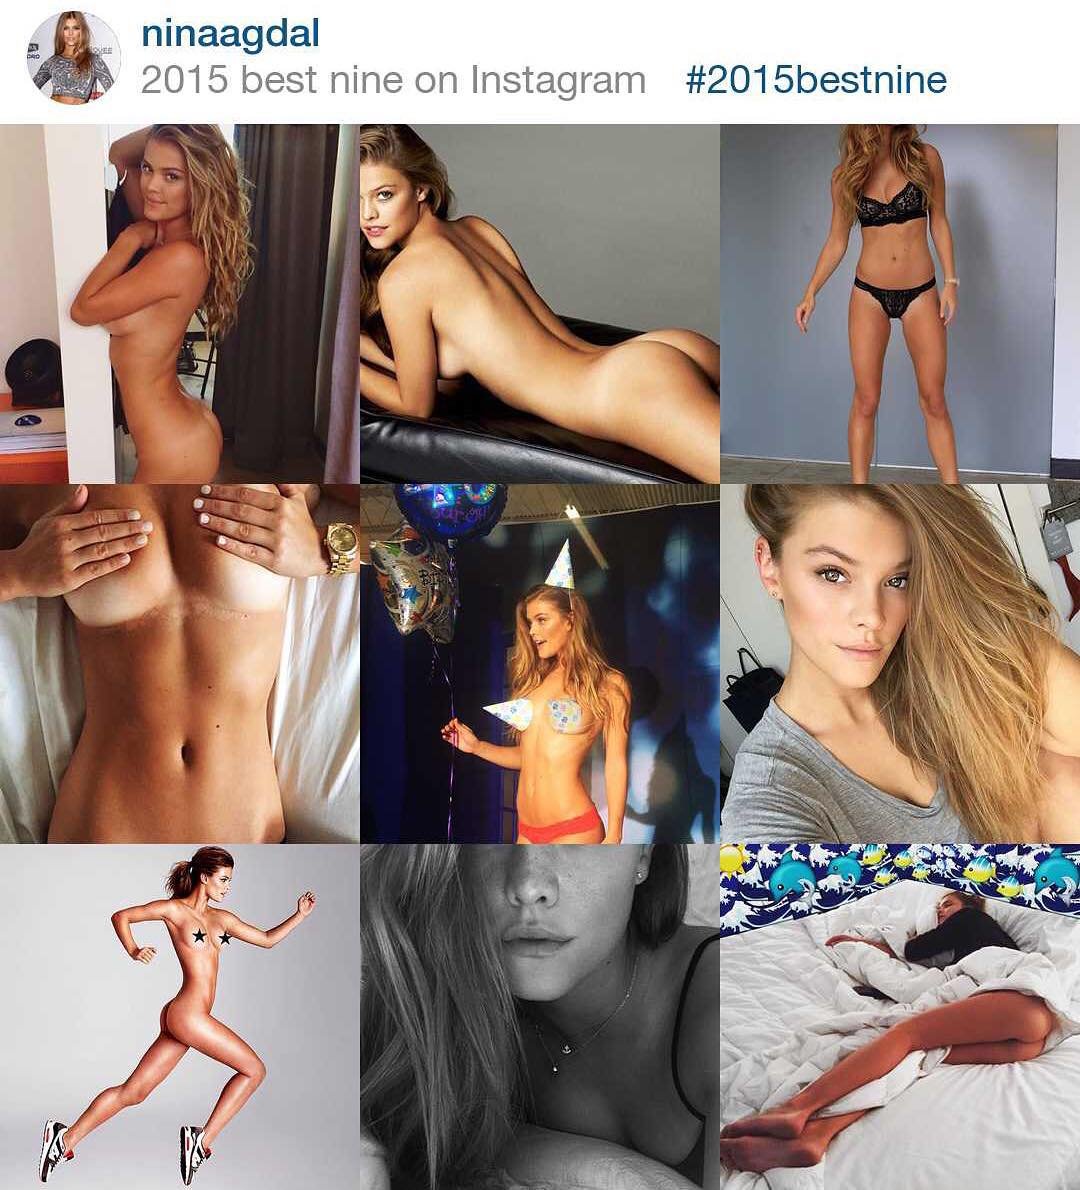 Nina Agdals Top Nine Instagram Pictures Of 2015 There Seems To Be A Pattern NSFW